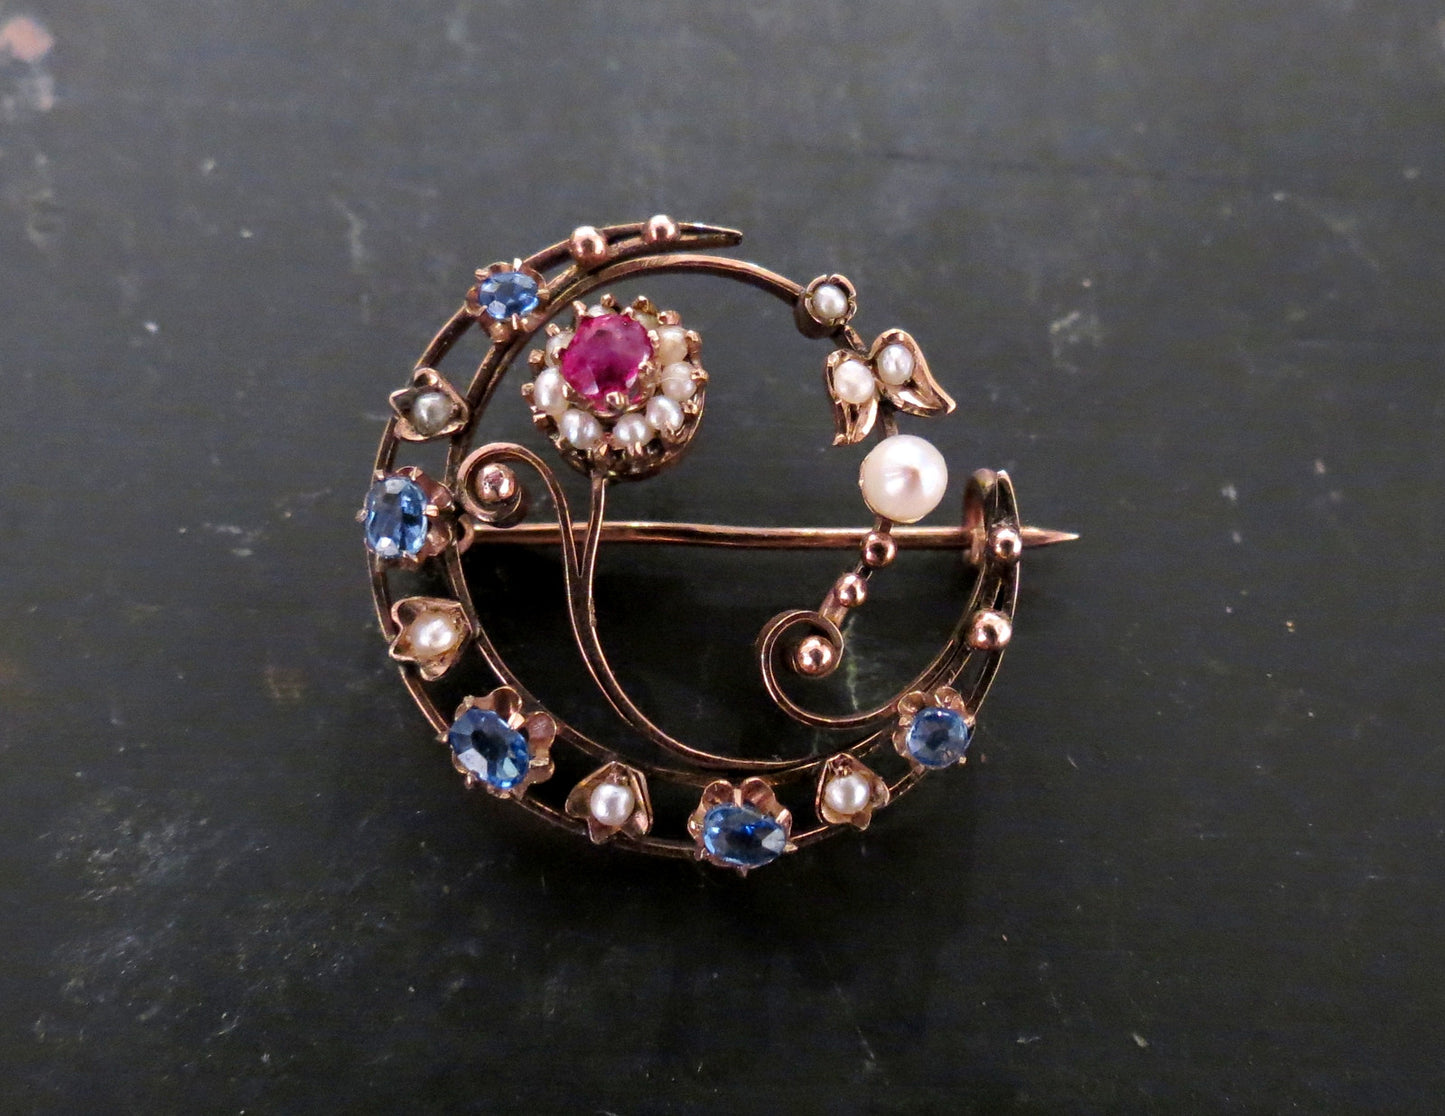 SOLD--Art Nouveau Ruby, Sapphire and Pearl Honeymoon Brooch 10k c. 1900